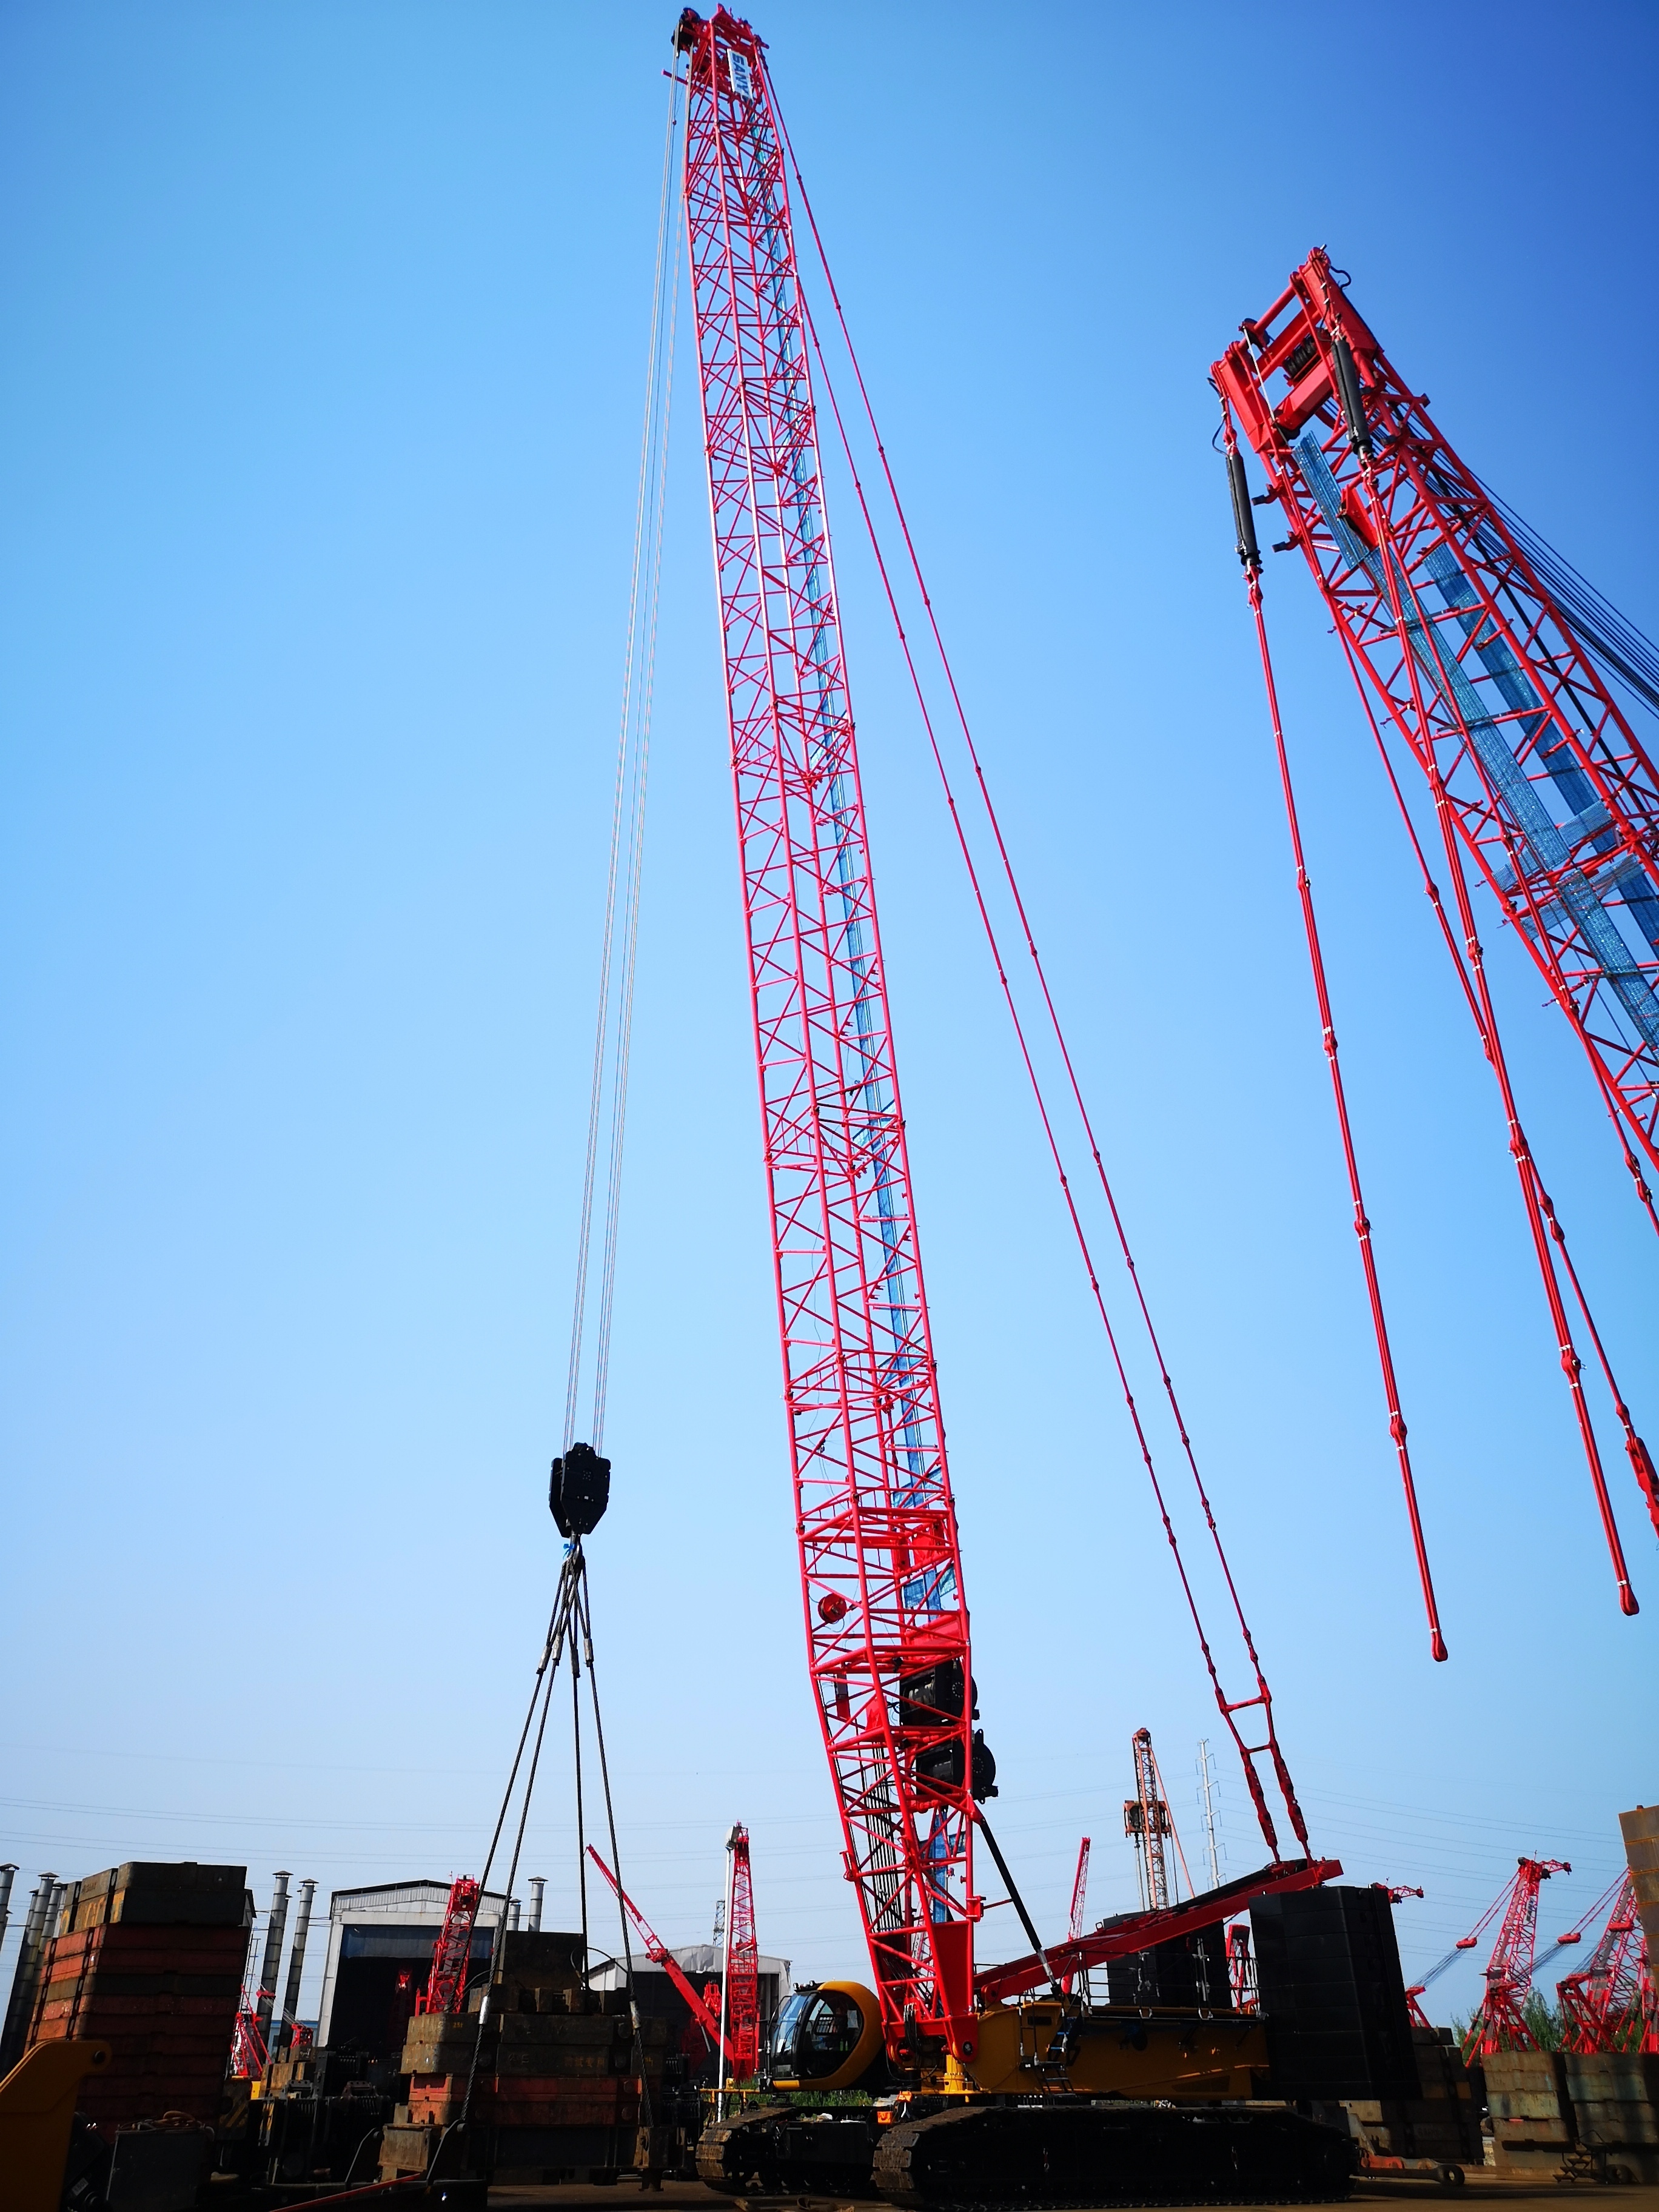 SANY America is unveiling the new SCA2600A crawler crane at ConExpo 2020, scheduled March 10-14, 2020 in Las Vegas.